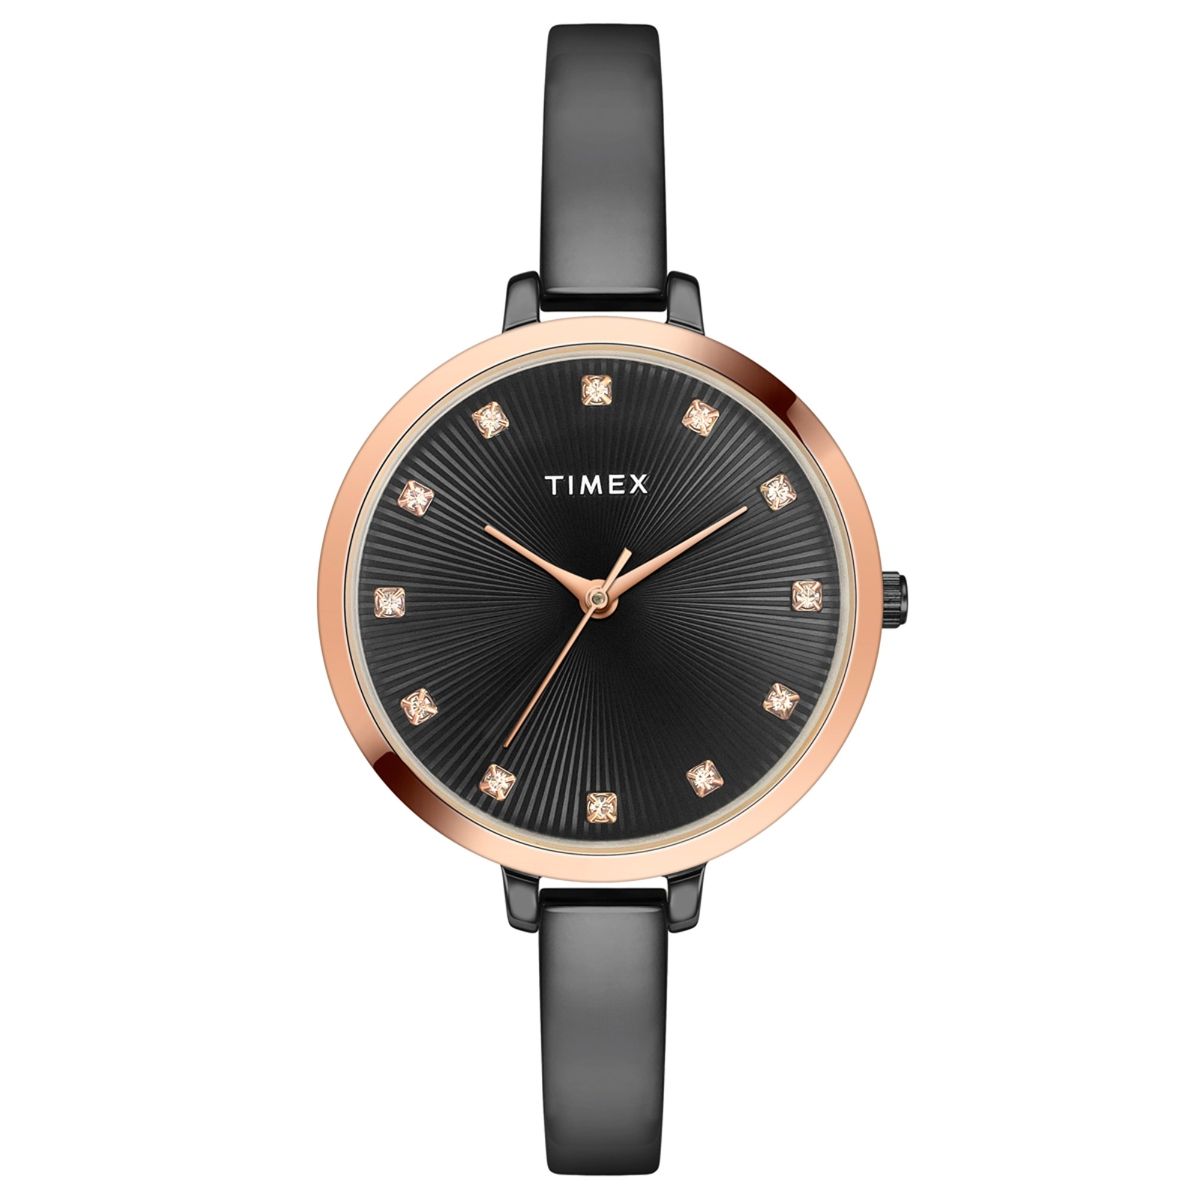 Timex Watches India - Buy Stylish Watches Online At Just Watches